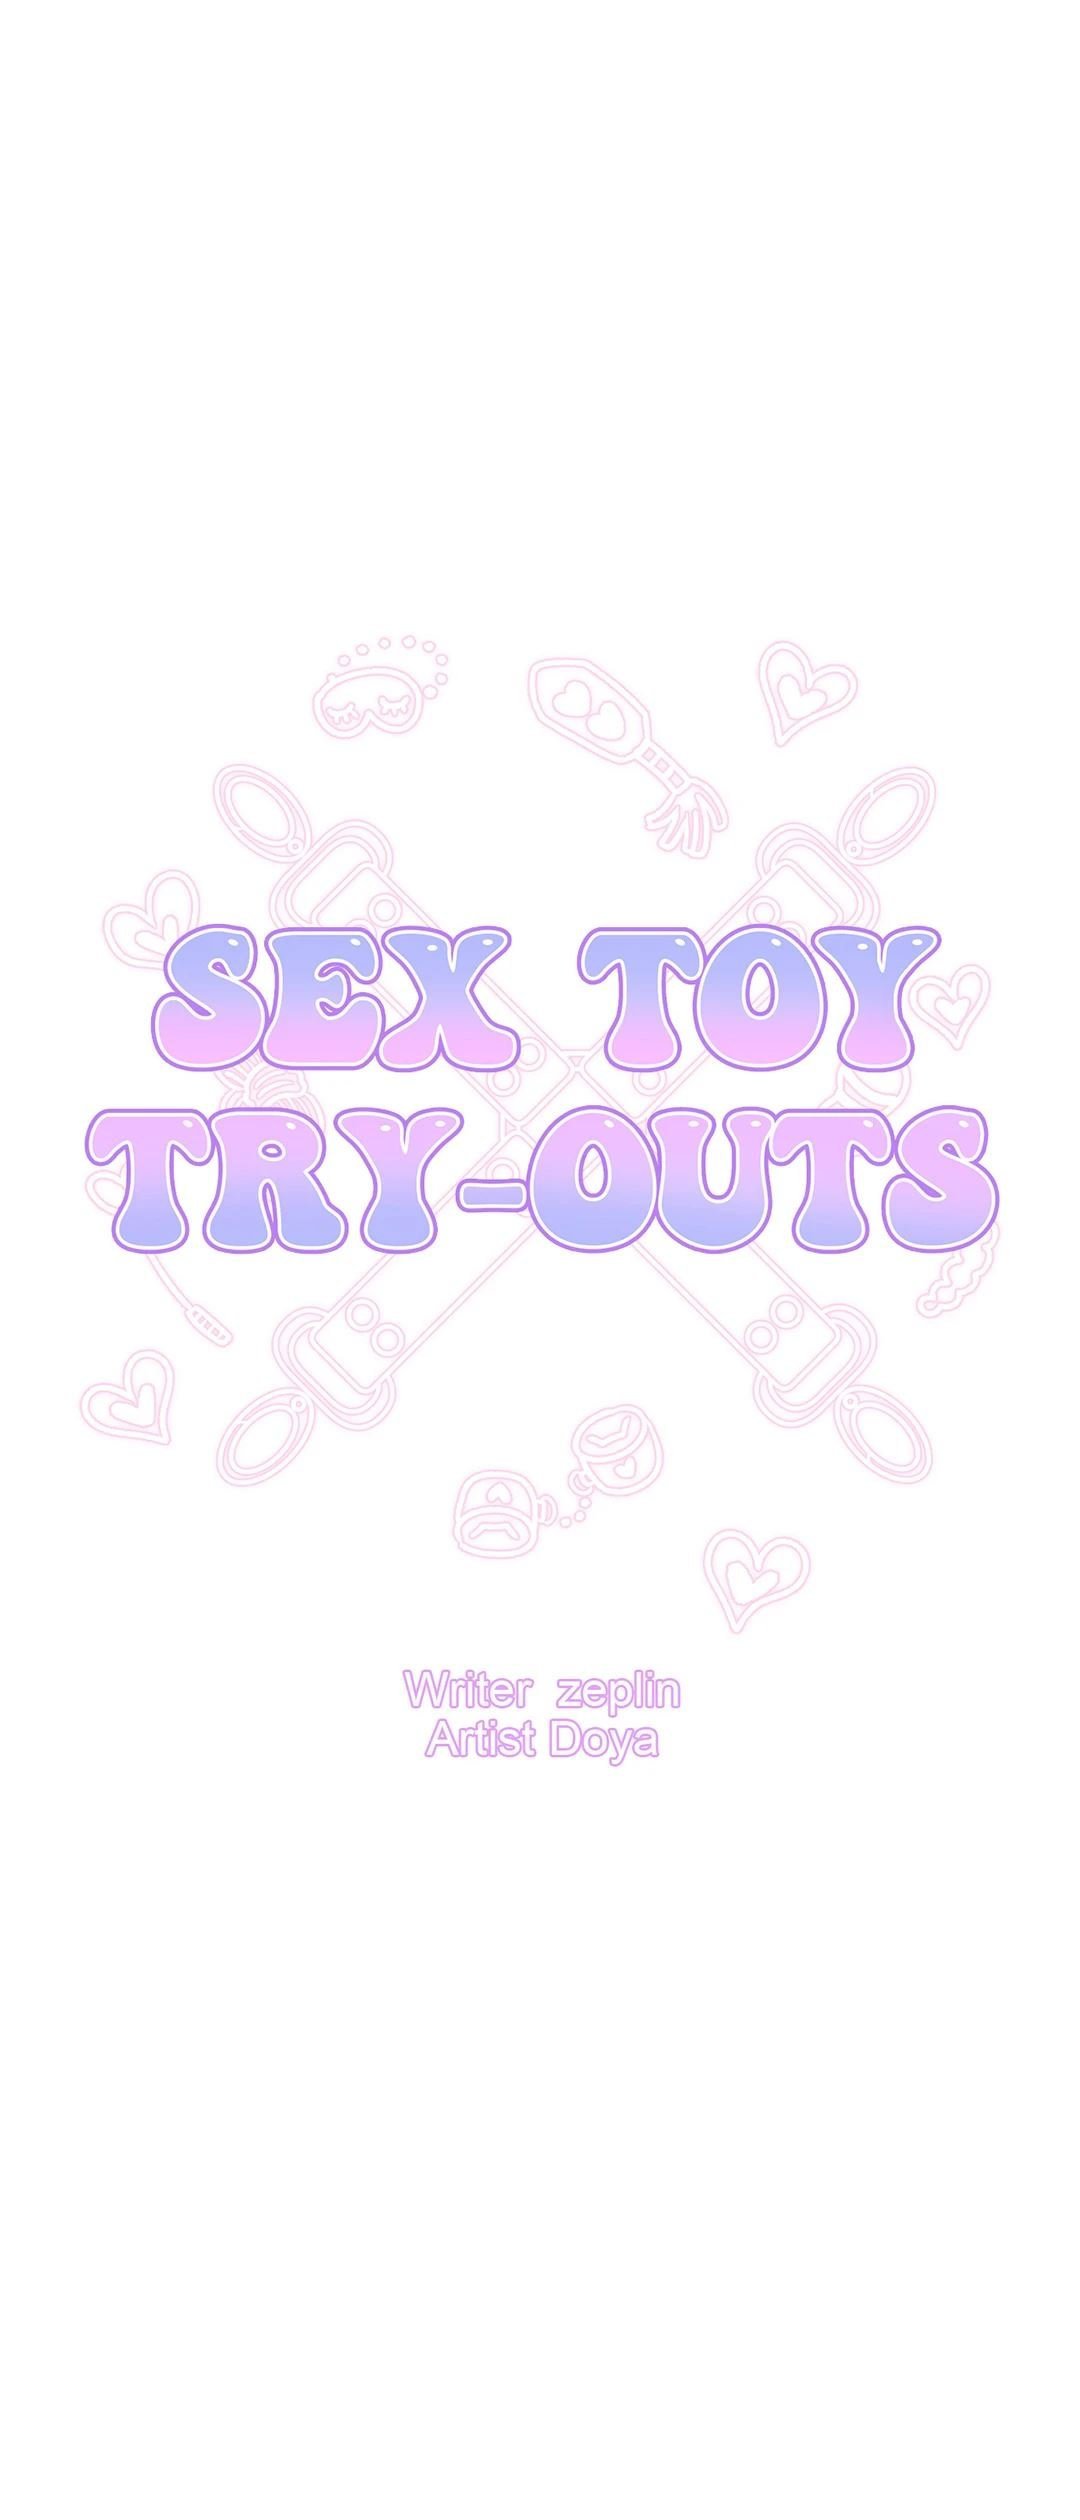 sex-toy-try-outs-chap-19-3